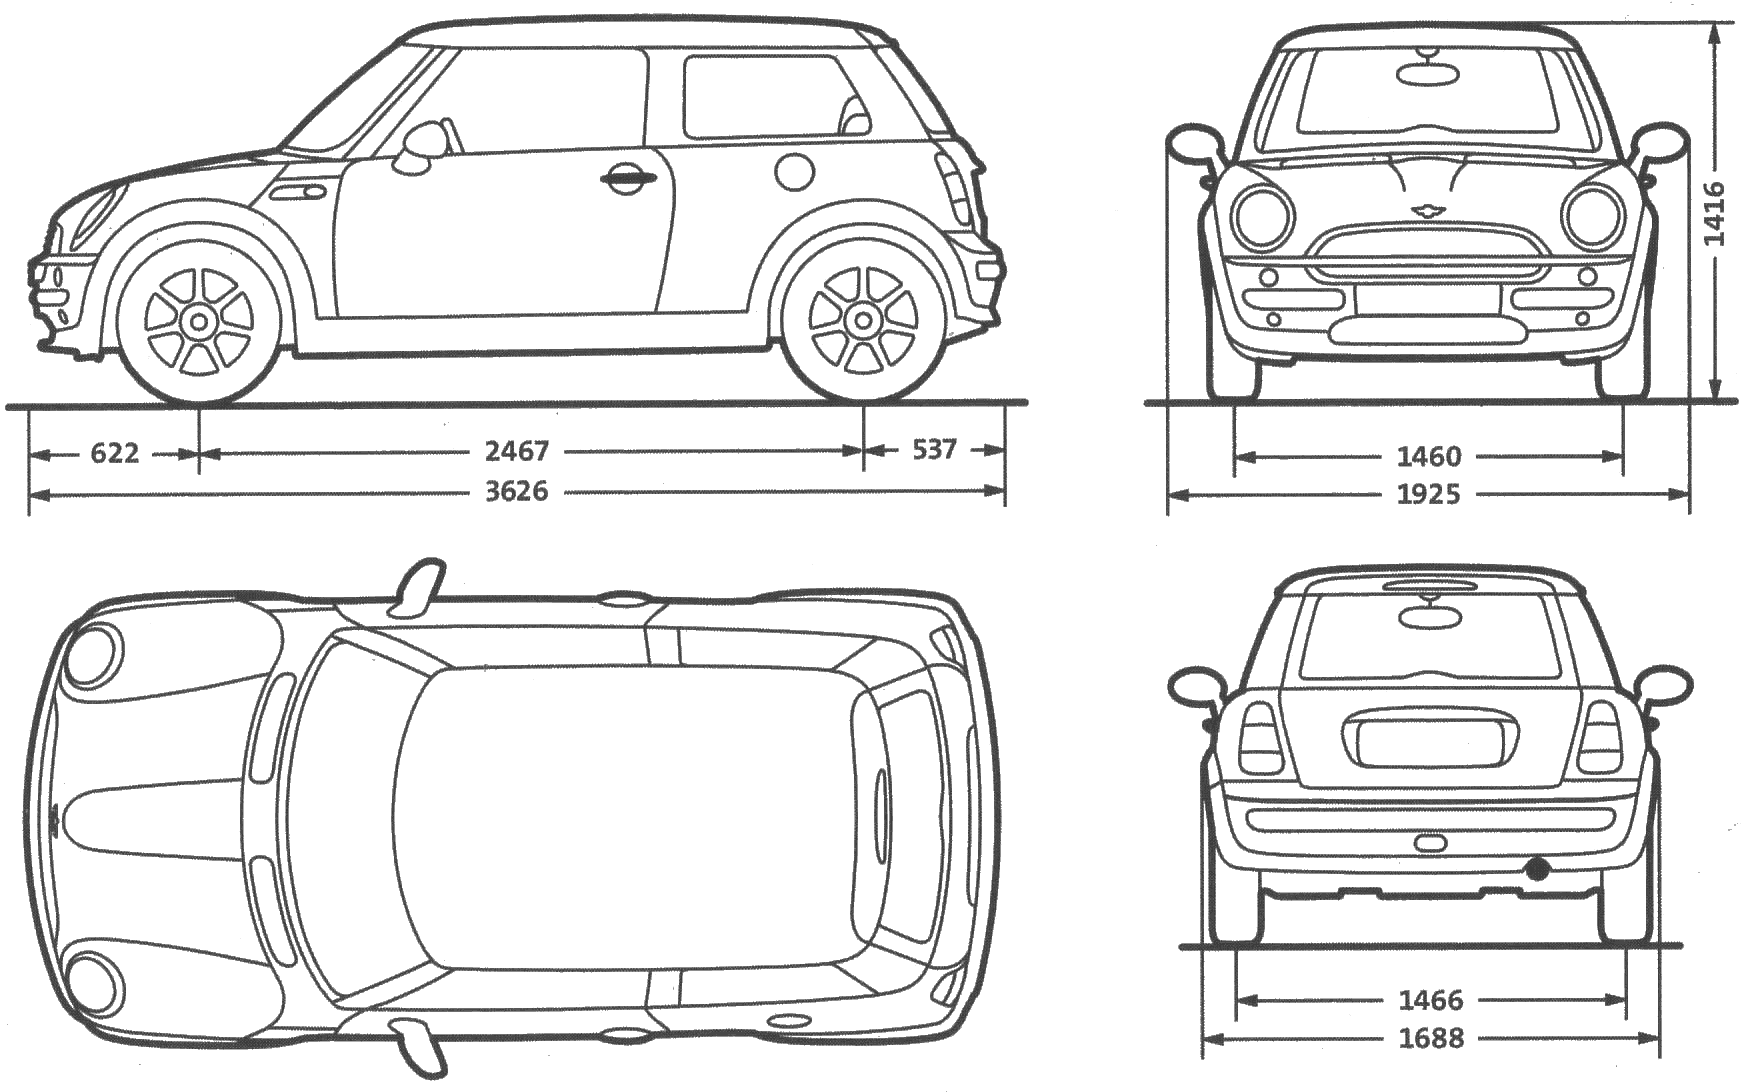  Mini Cooper on An Outline Of A 1st Gen Cooper Or Cooper S   North American Motoring